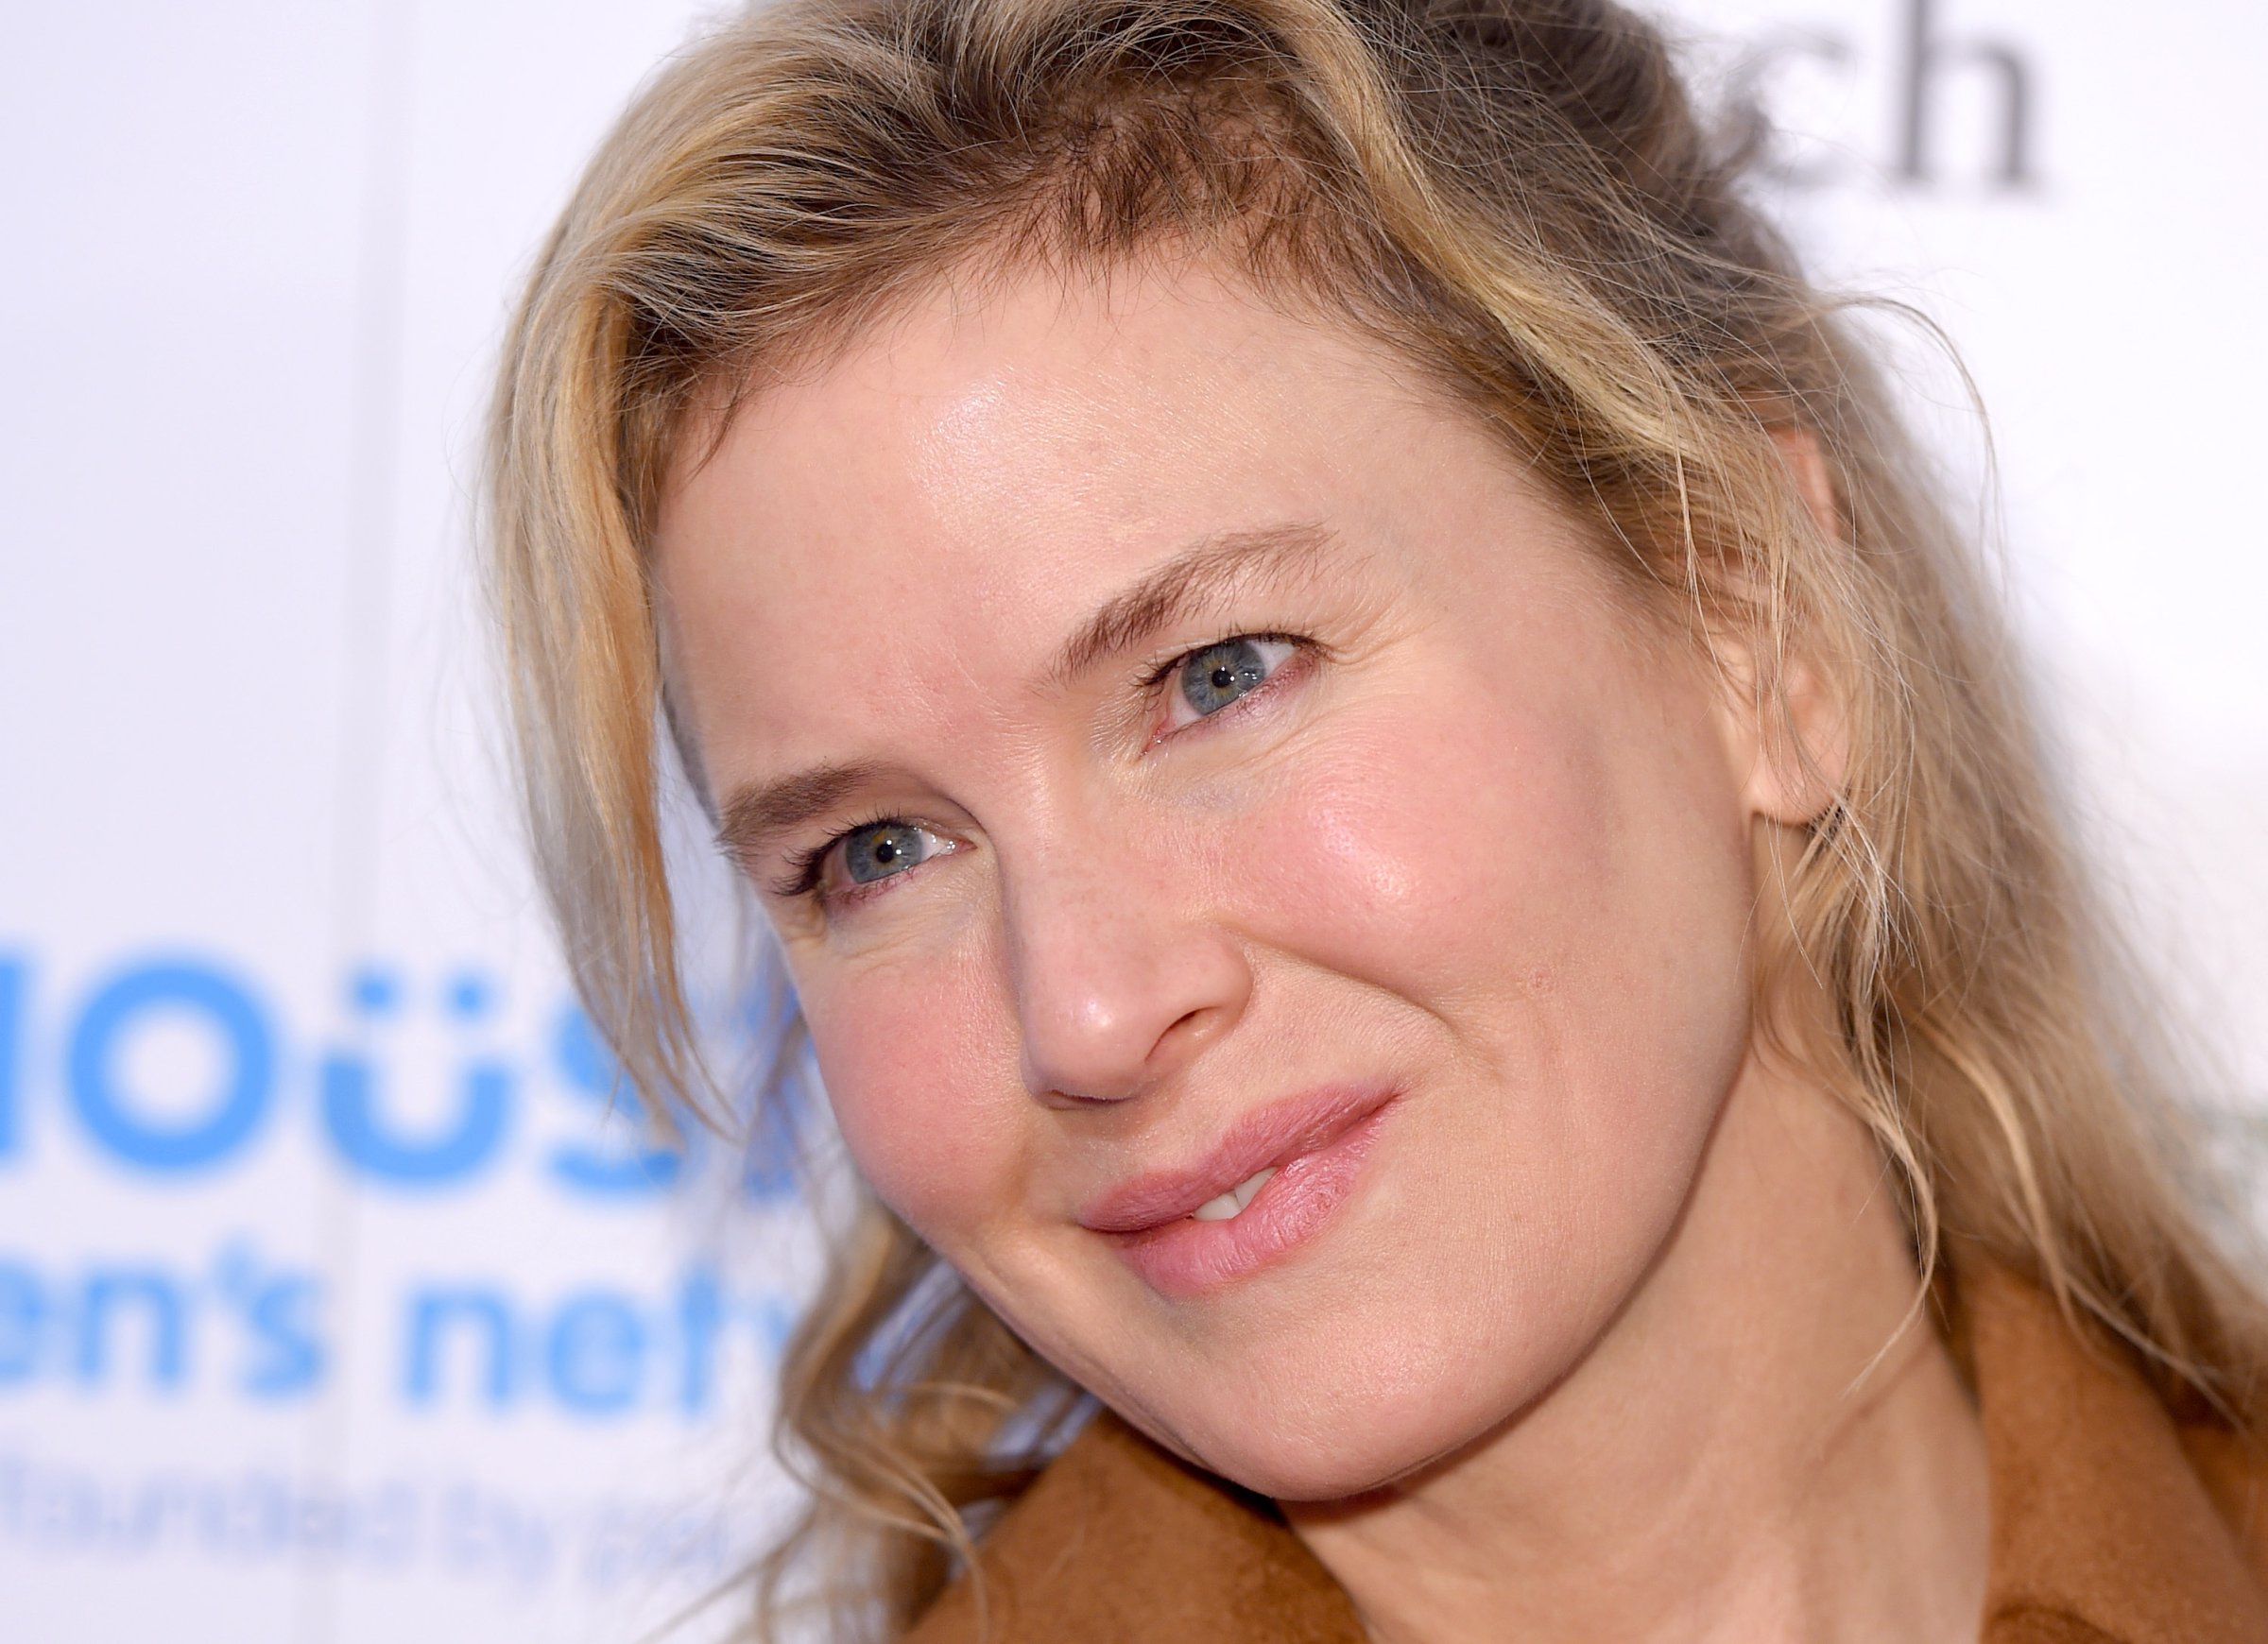 Renee Zellweger attends the SeriousFun Children's Network London Gala at The Roundhouse on Nov. 3, 2015 in London, England.